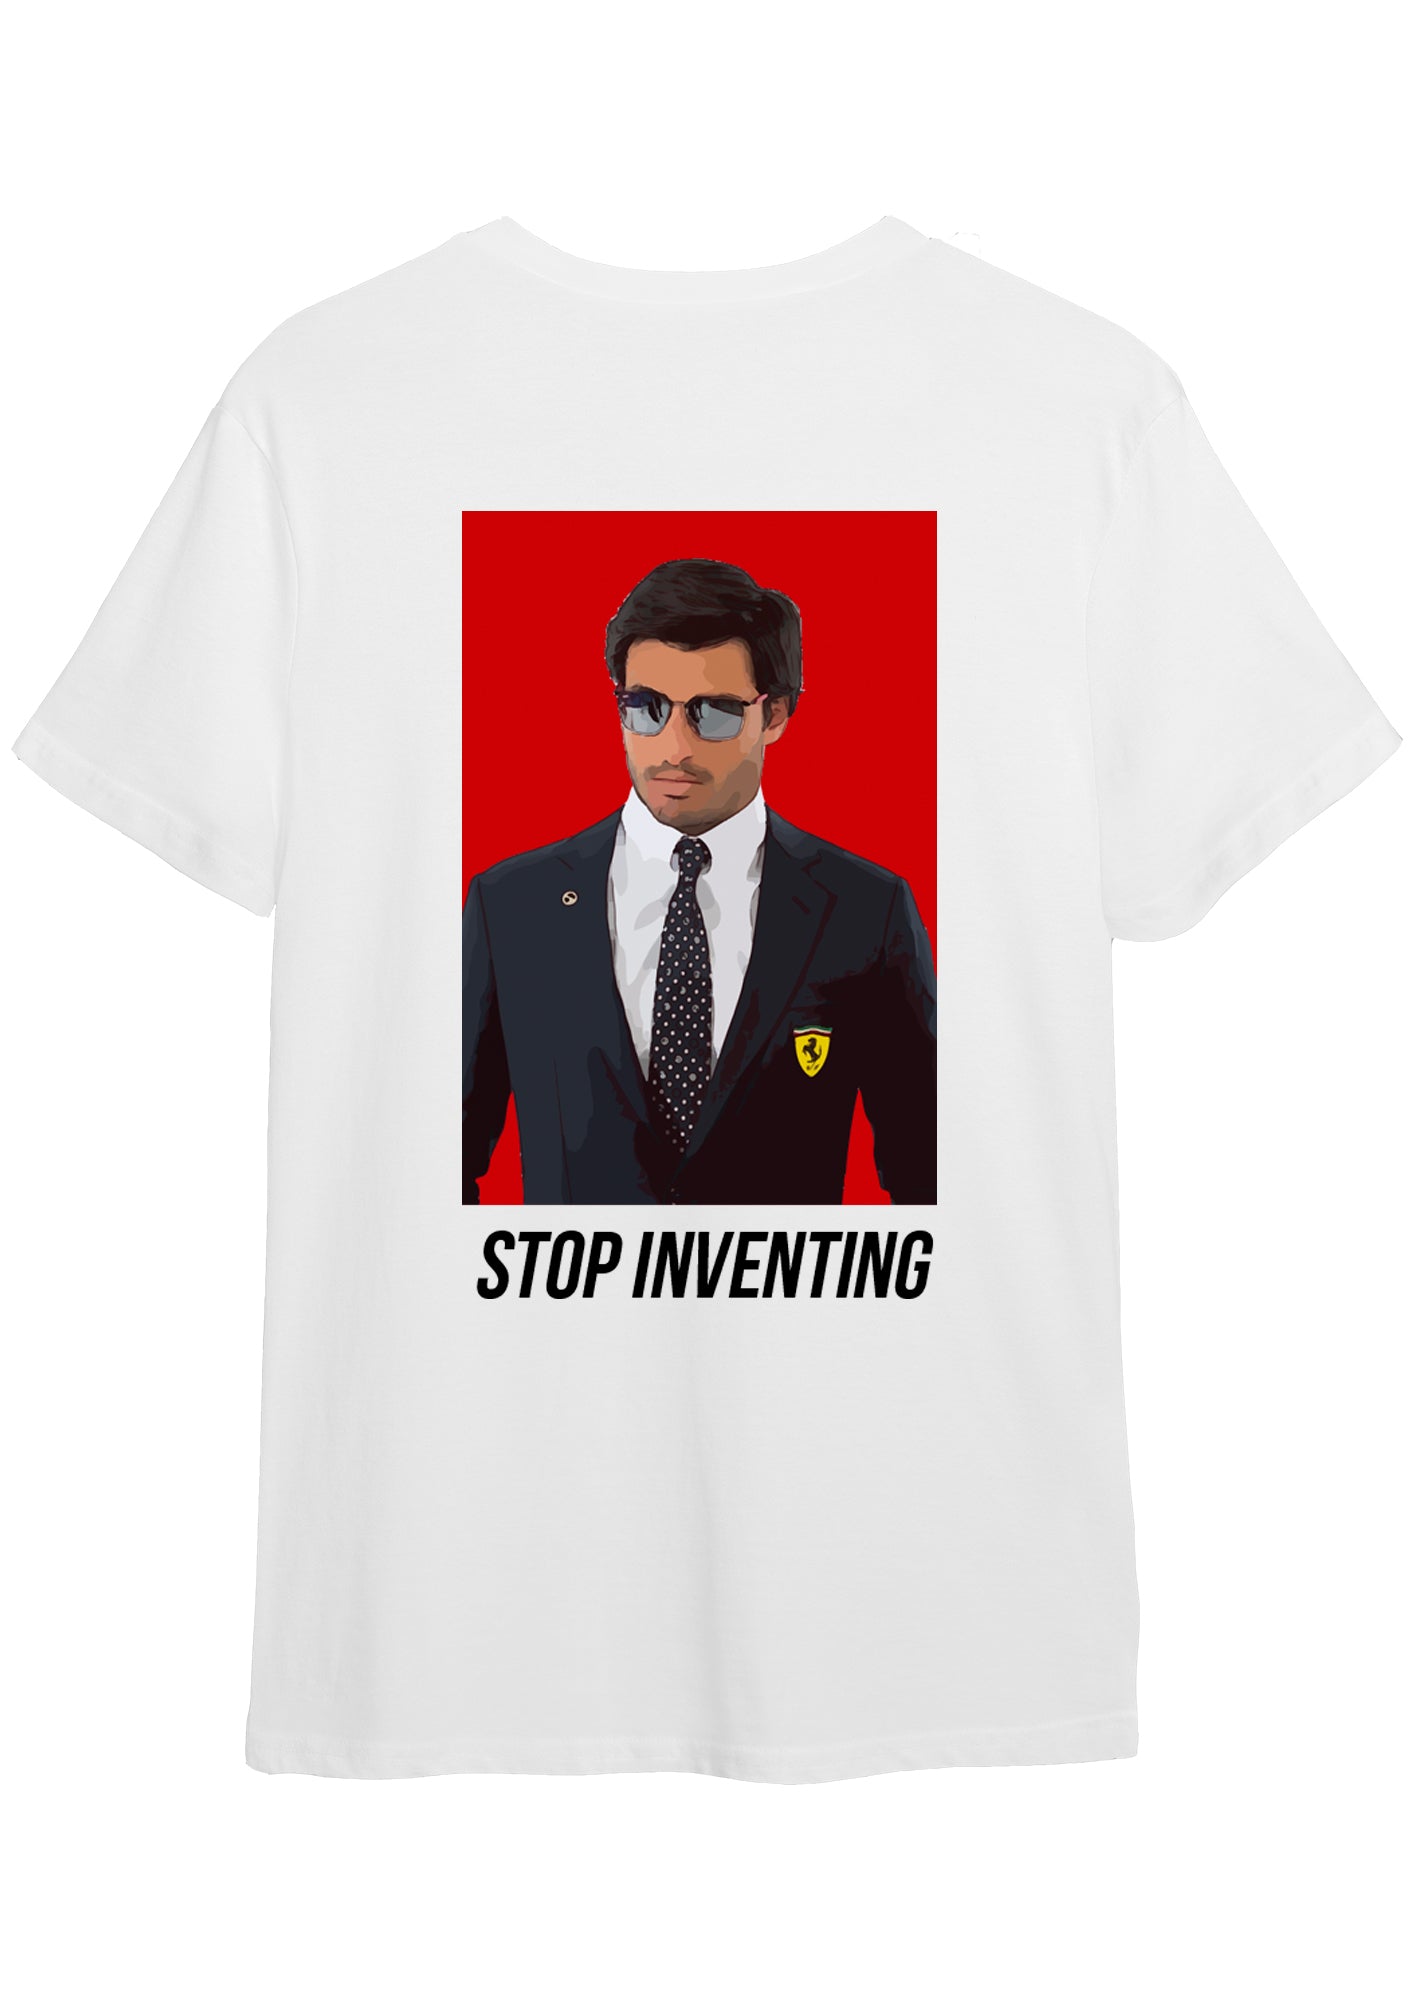 "STOP INVENTING" T-shirt by Carlos Sainz